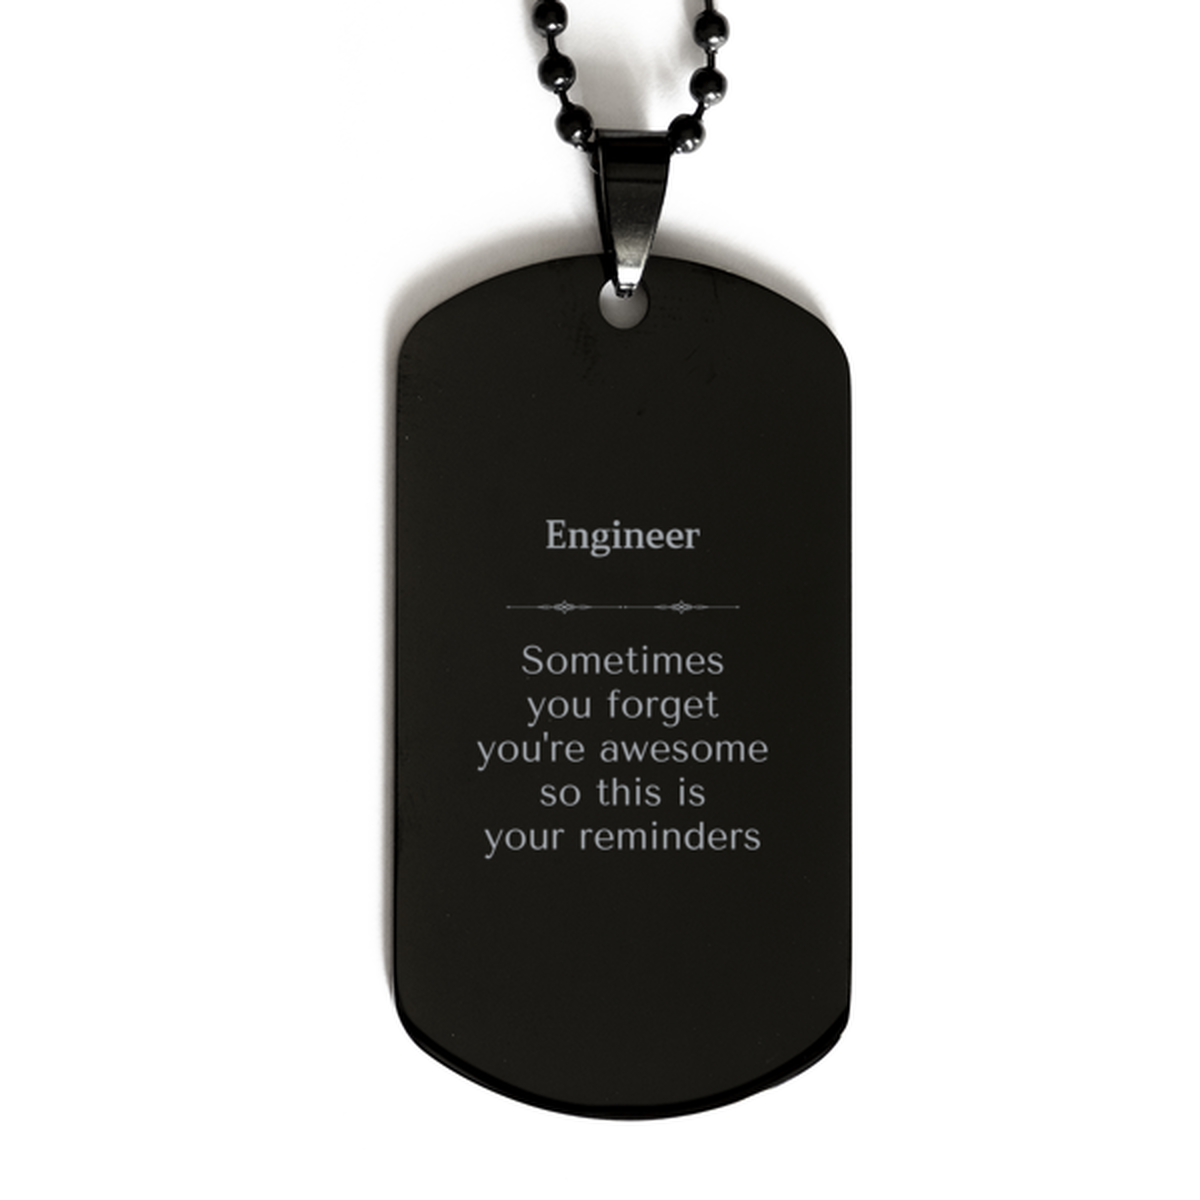 Sentimental Engineer Black Dog Tag, Engineer Sometimes you forget you're awesome so this is your reminders, Graduation Christmas Birthday Gifts for Engineer, Men, Women, Coworkers